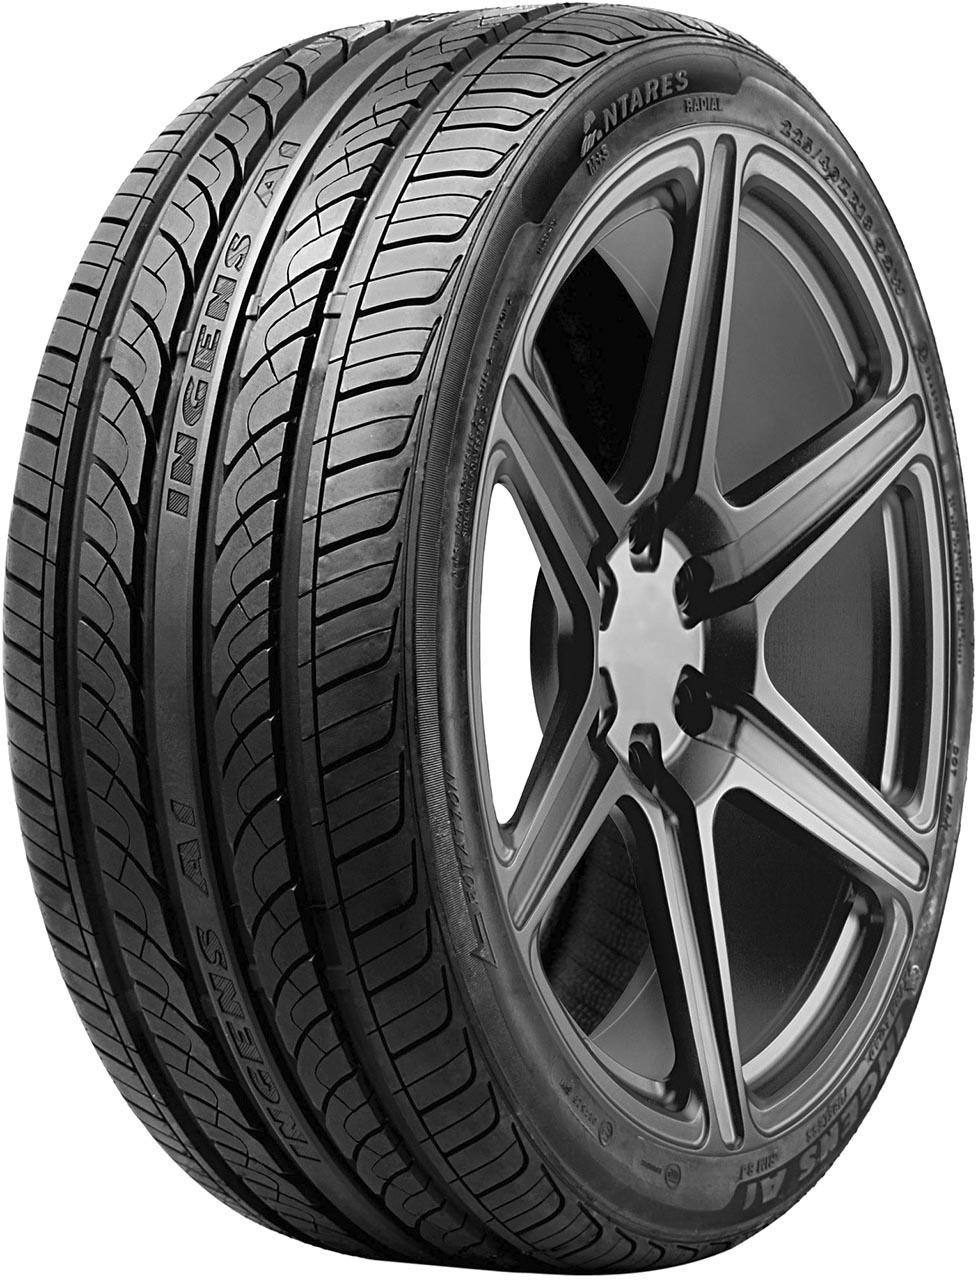 Antares Tires Ingens A1 205/65 R15 94H